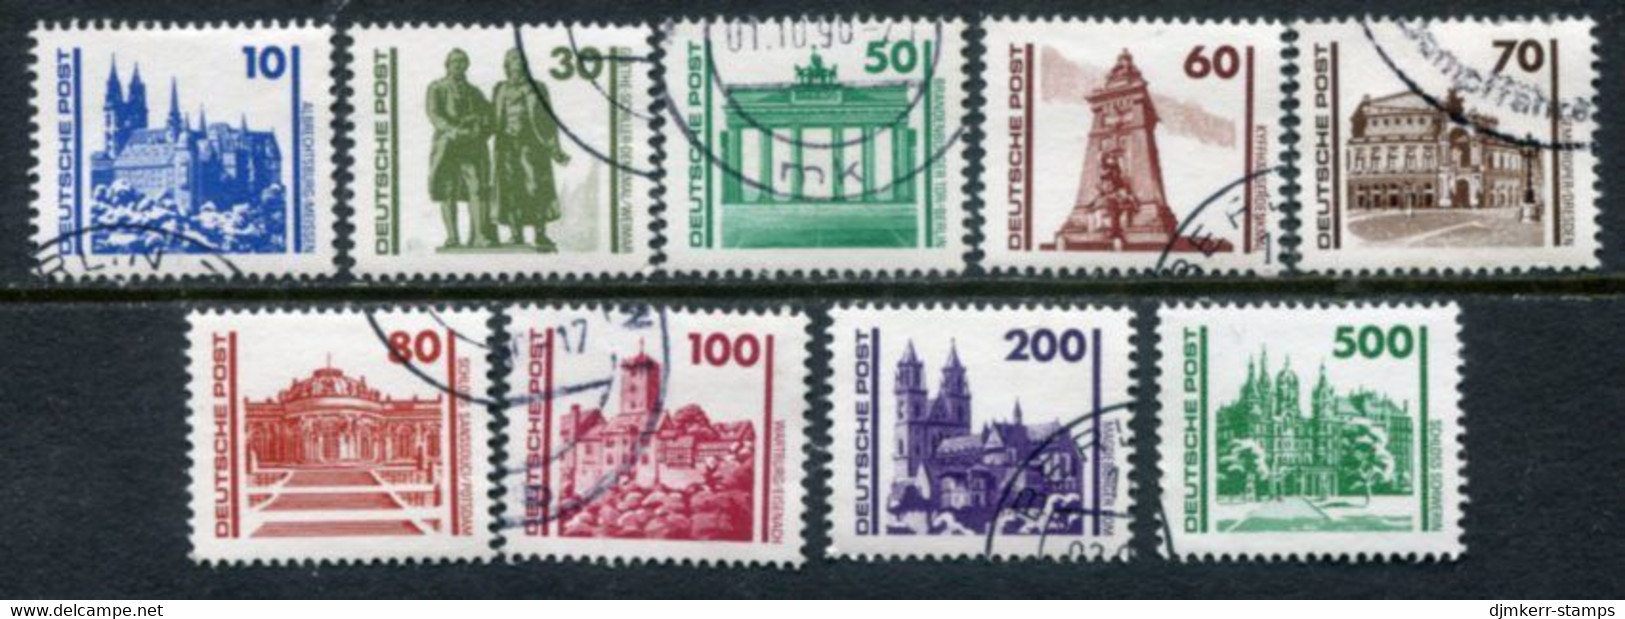 DDR 1990 Buildings And Monuments Definitive Used.  Michel 3344-52 - Used Stamps